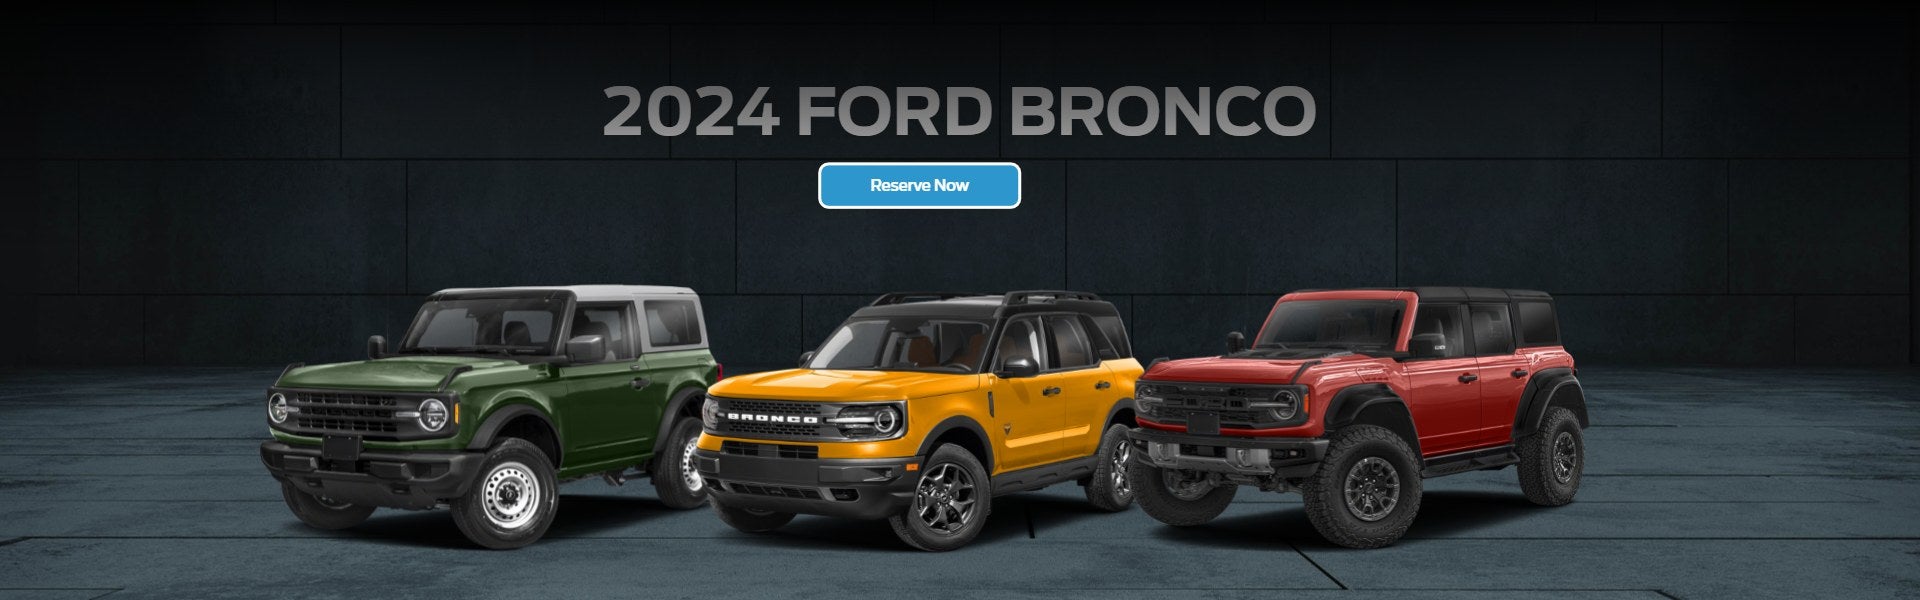 2024 Ford Bronco reserve now 